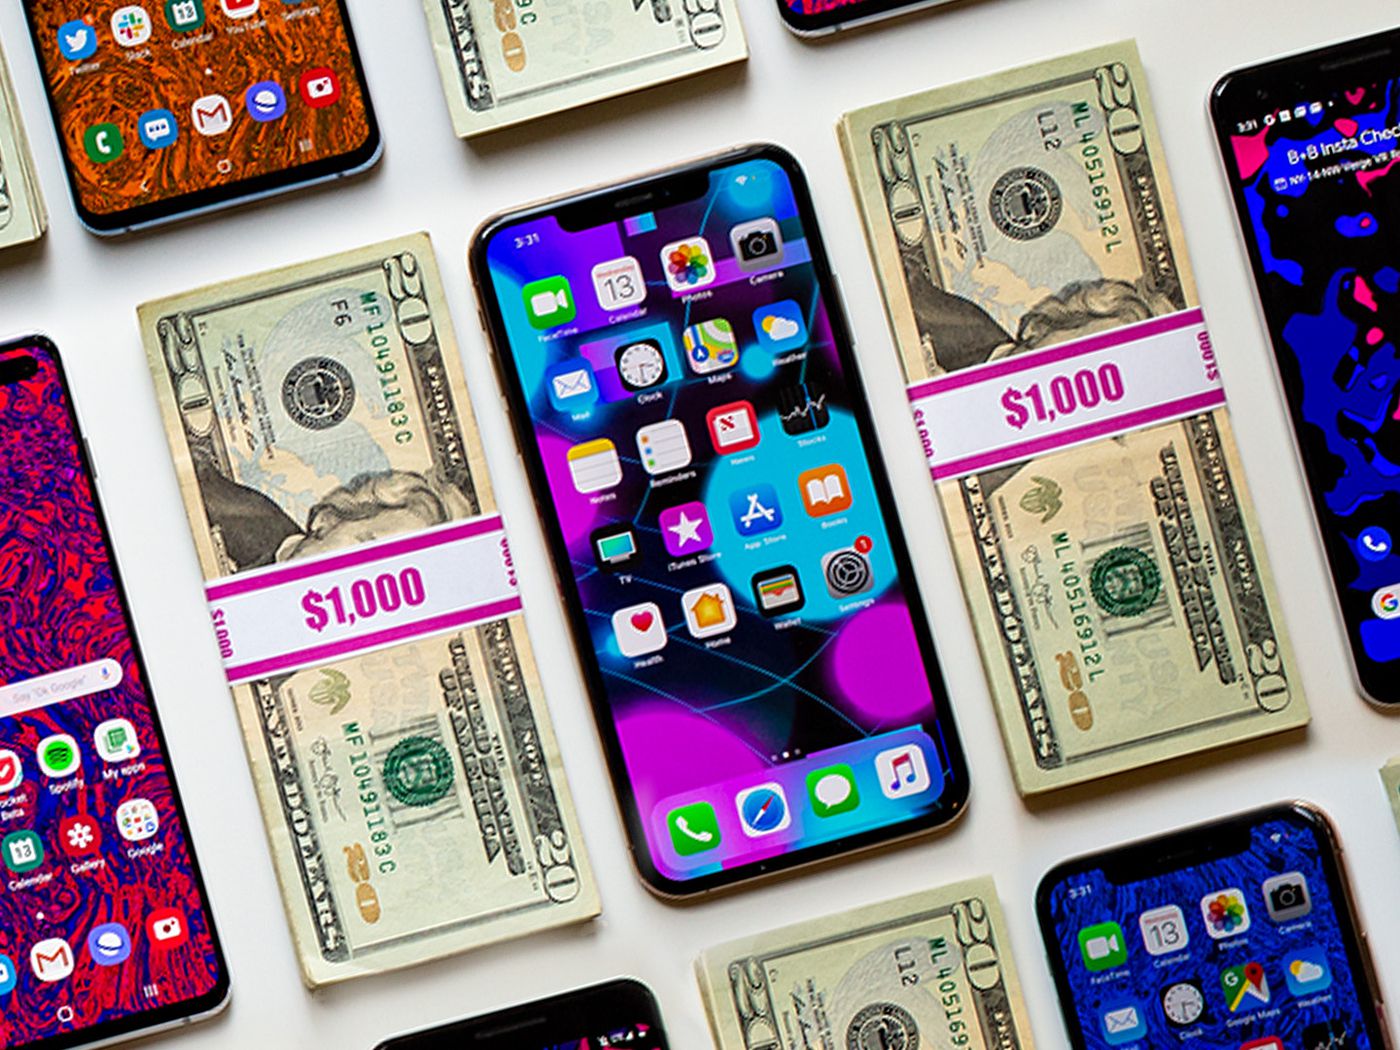 Top 5 most expensive phones in the world - Photo 1.